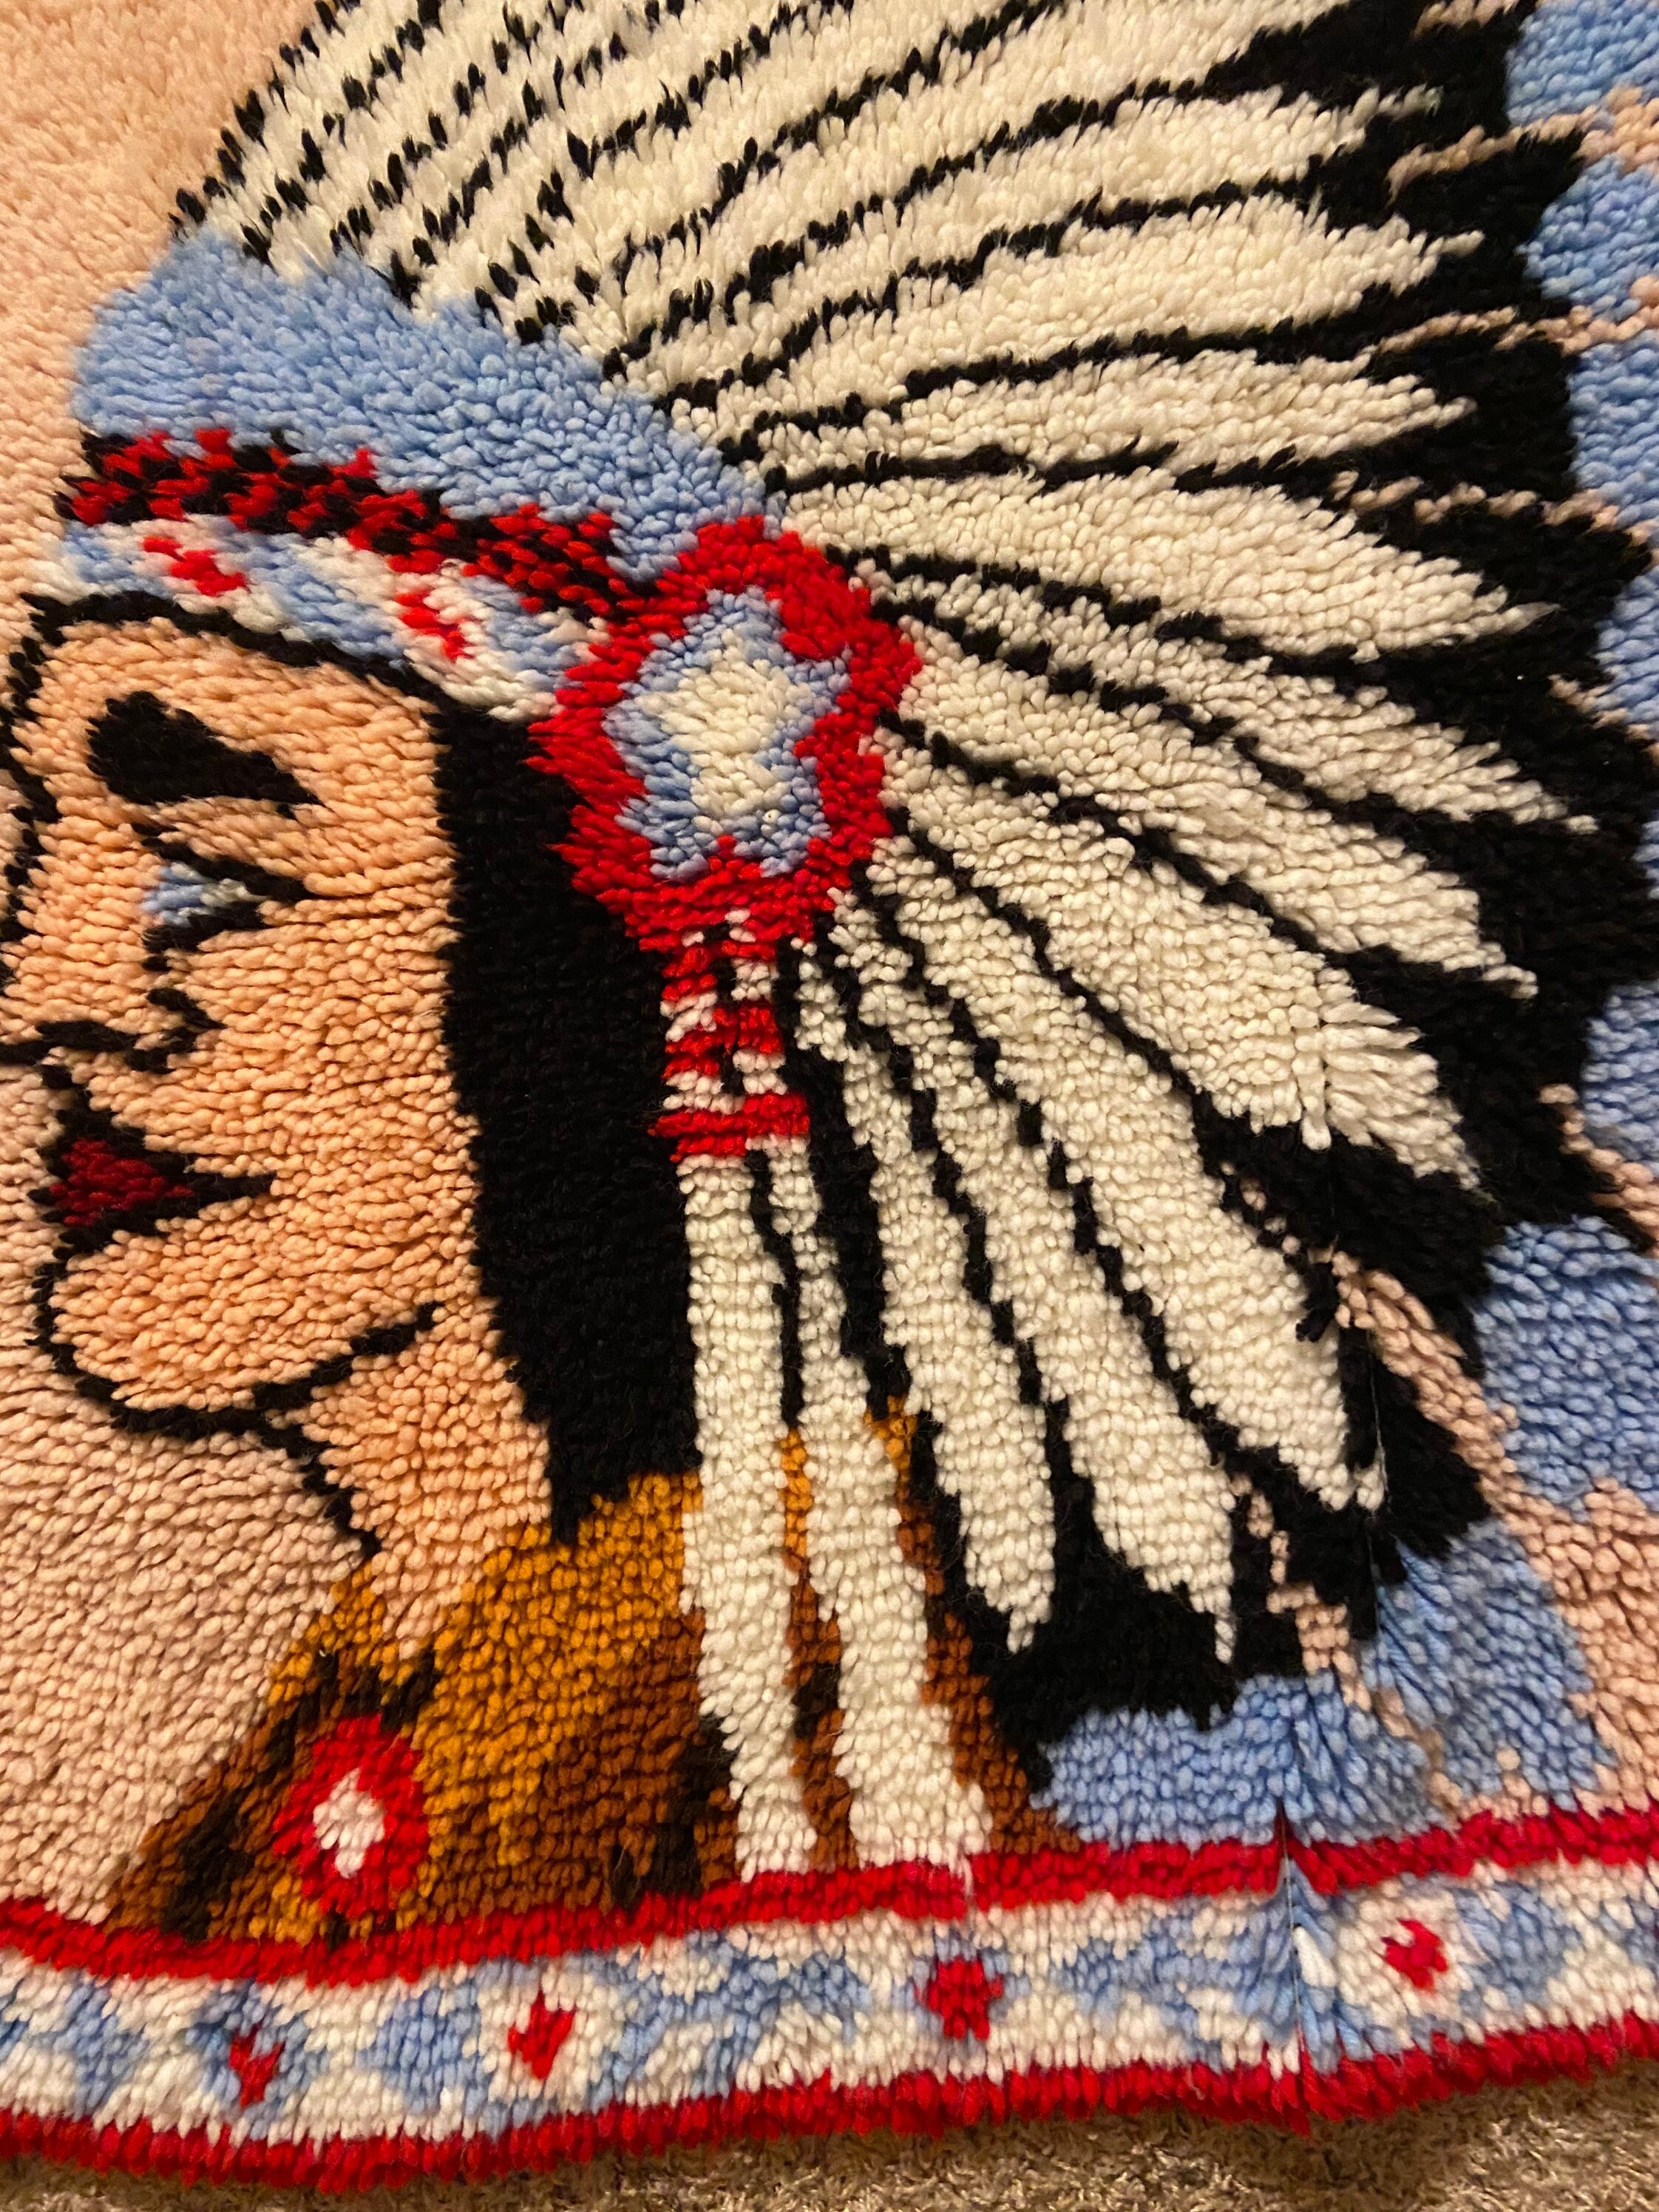 Latch Hook Rug With Native American on It - Etsy